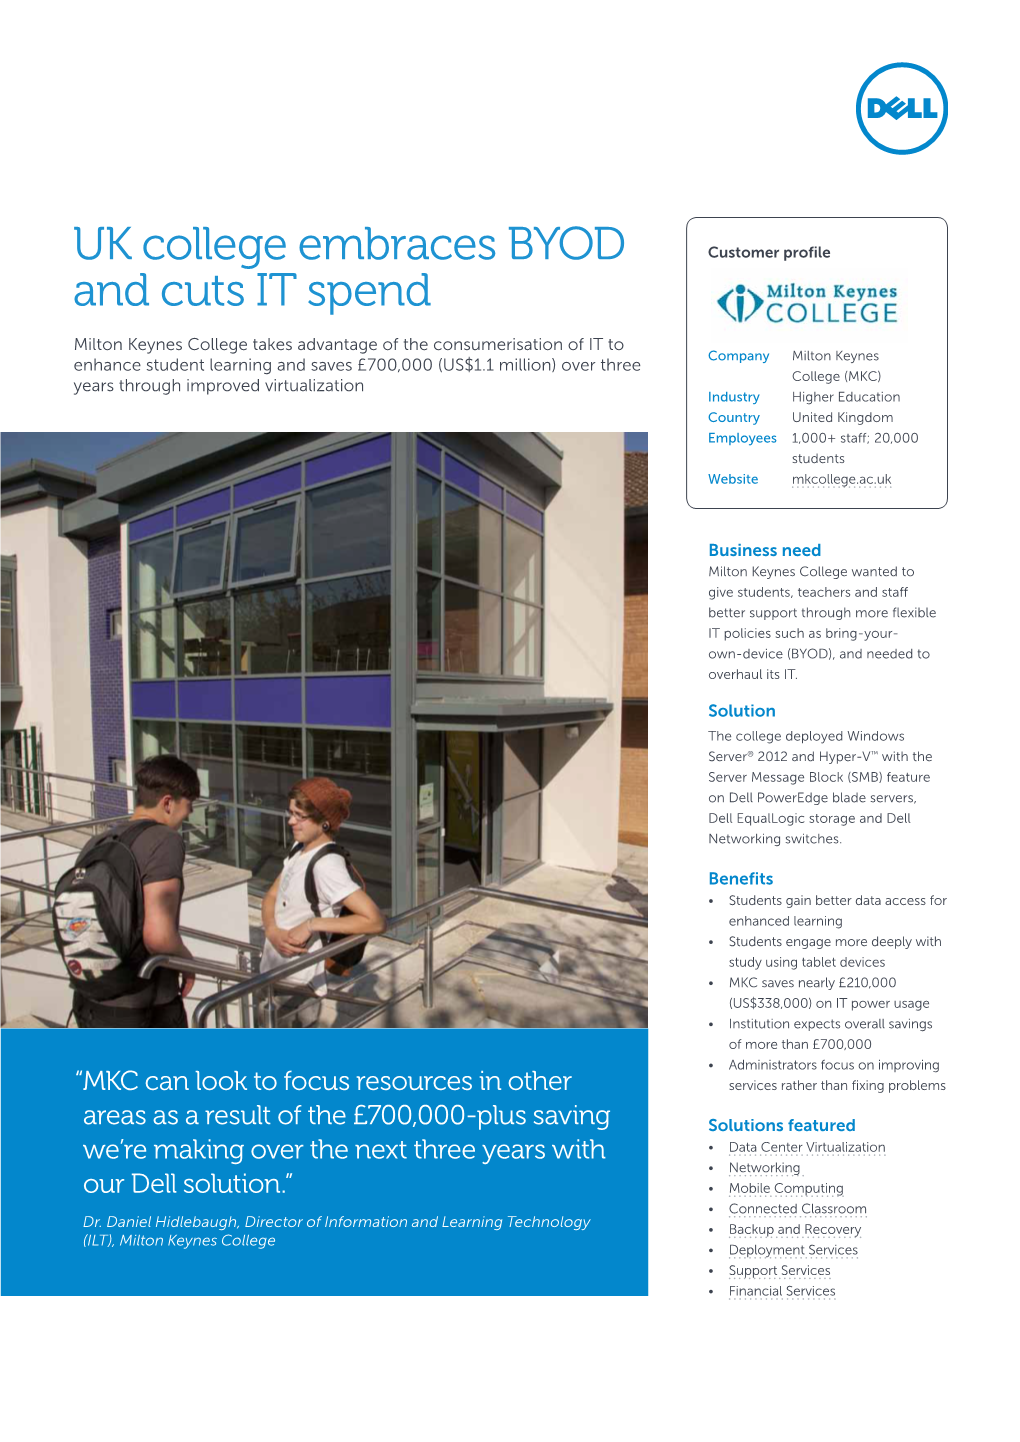 UK College Embraces BYOD and Cuts IT Spend